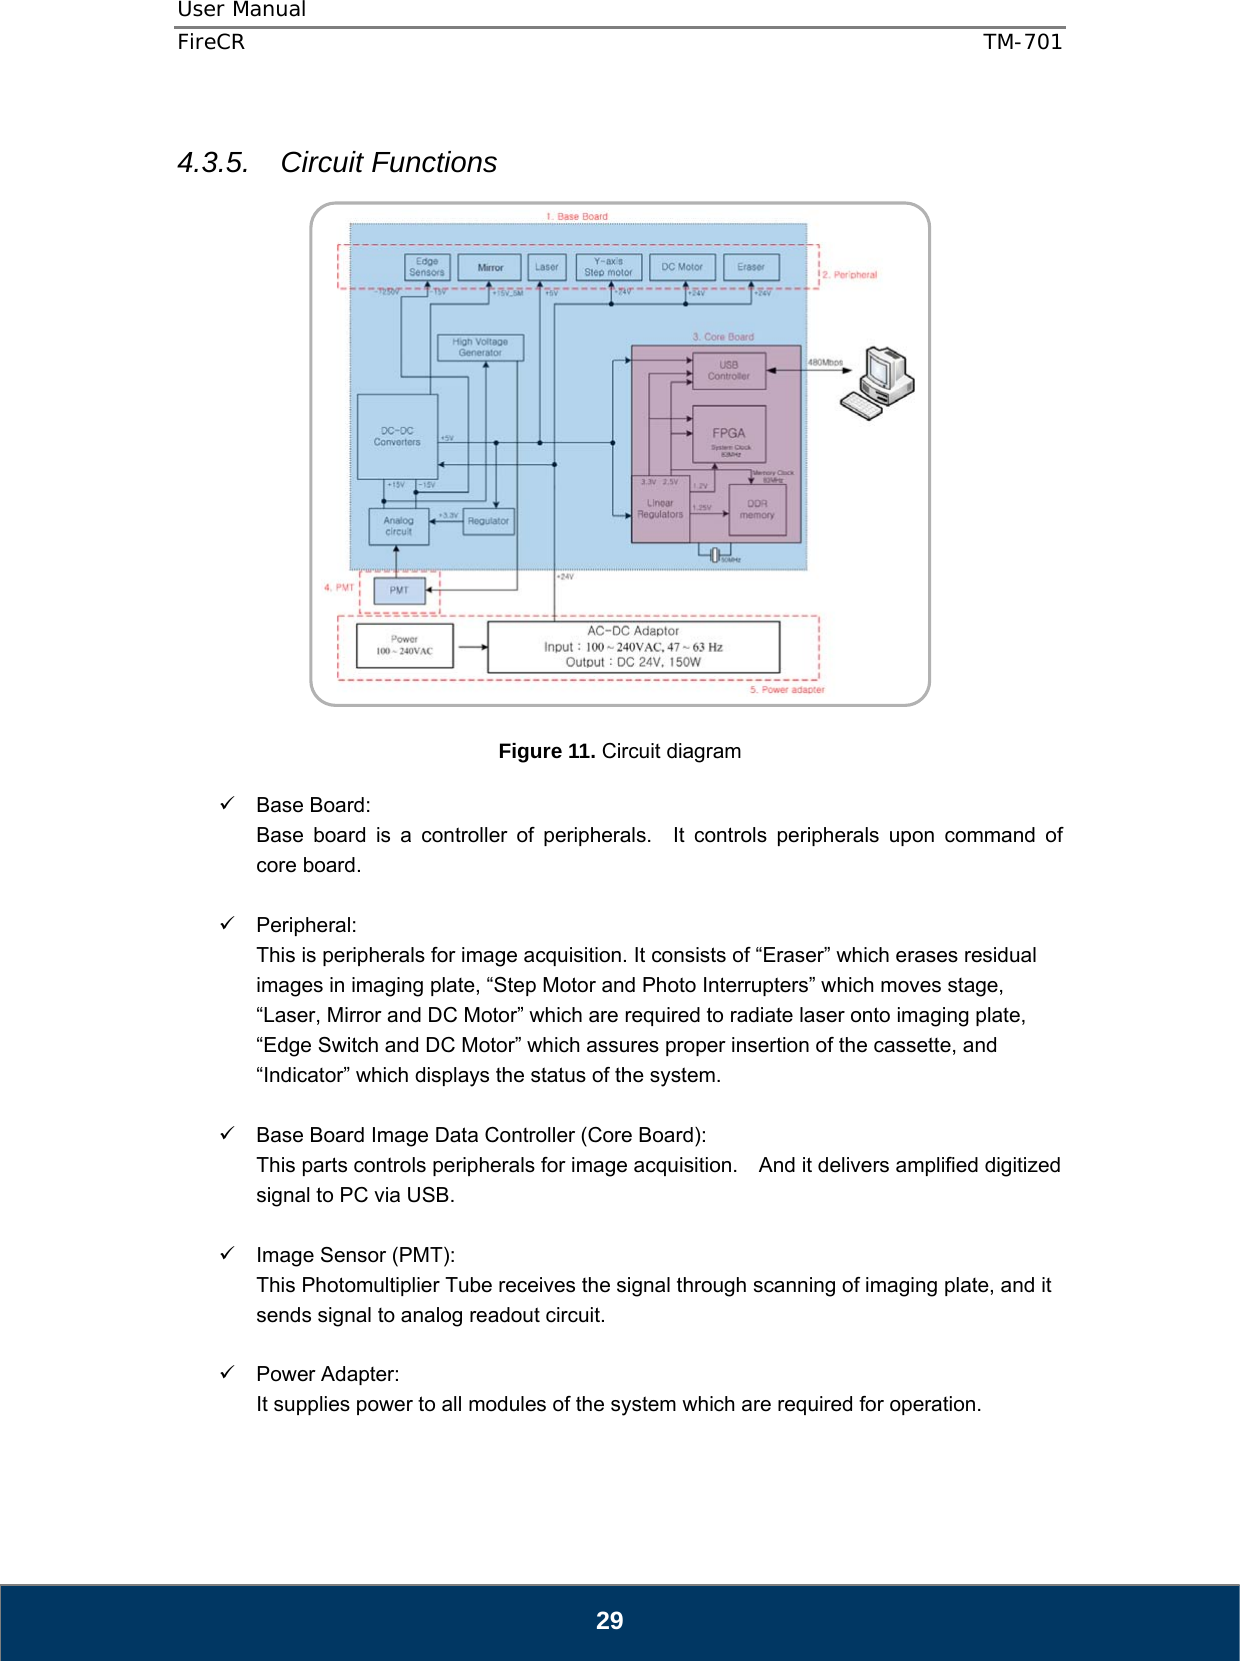 User Manual  FireCR  TM-701   29  4.3.5. Circuit Functions    Figure 11. Circuit diagram   Base Board:  Base board is a controller of peripherals.  It controls peripherals upon command of core board.   Peripheral: This is peripherals for image acquisition. It consists of “Eraser” which erases residual images in imaging plate, “Step Motor and Photo Interrupters” which moves stage, “Laser, Mirror and DC Motor” which are required to radiate laser onto imaging plate, “Edge Switch and DC Motor” which assures proper insertion of the cassette, and “Indicator” which displays the status of the system.    Base Board Image Data Controller (Core Board):   This parts controls peripherals for image acquisition.    And it delivers amplified digitized signal to PC via USB.    Image Sensor (PMT):   This Photomultiplier Tube receives the signal through scanning of imaging plate, and it sends signal to analog readout circuit.   Power Adapter:  It supplies power to all modules of the system which are required for operation.      